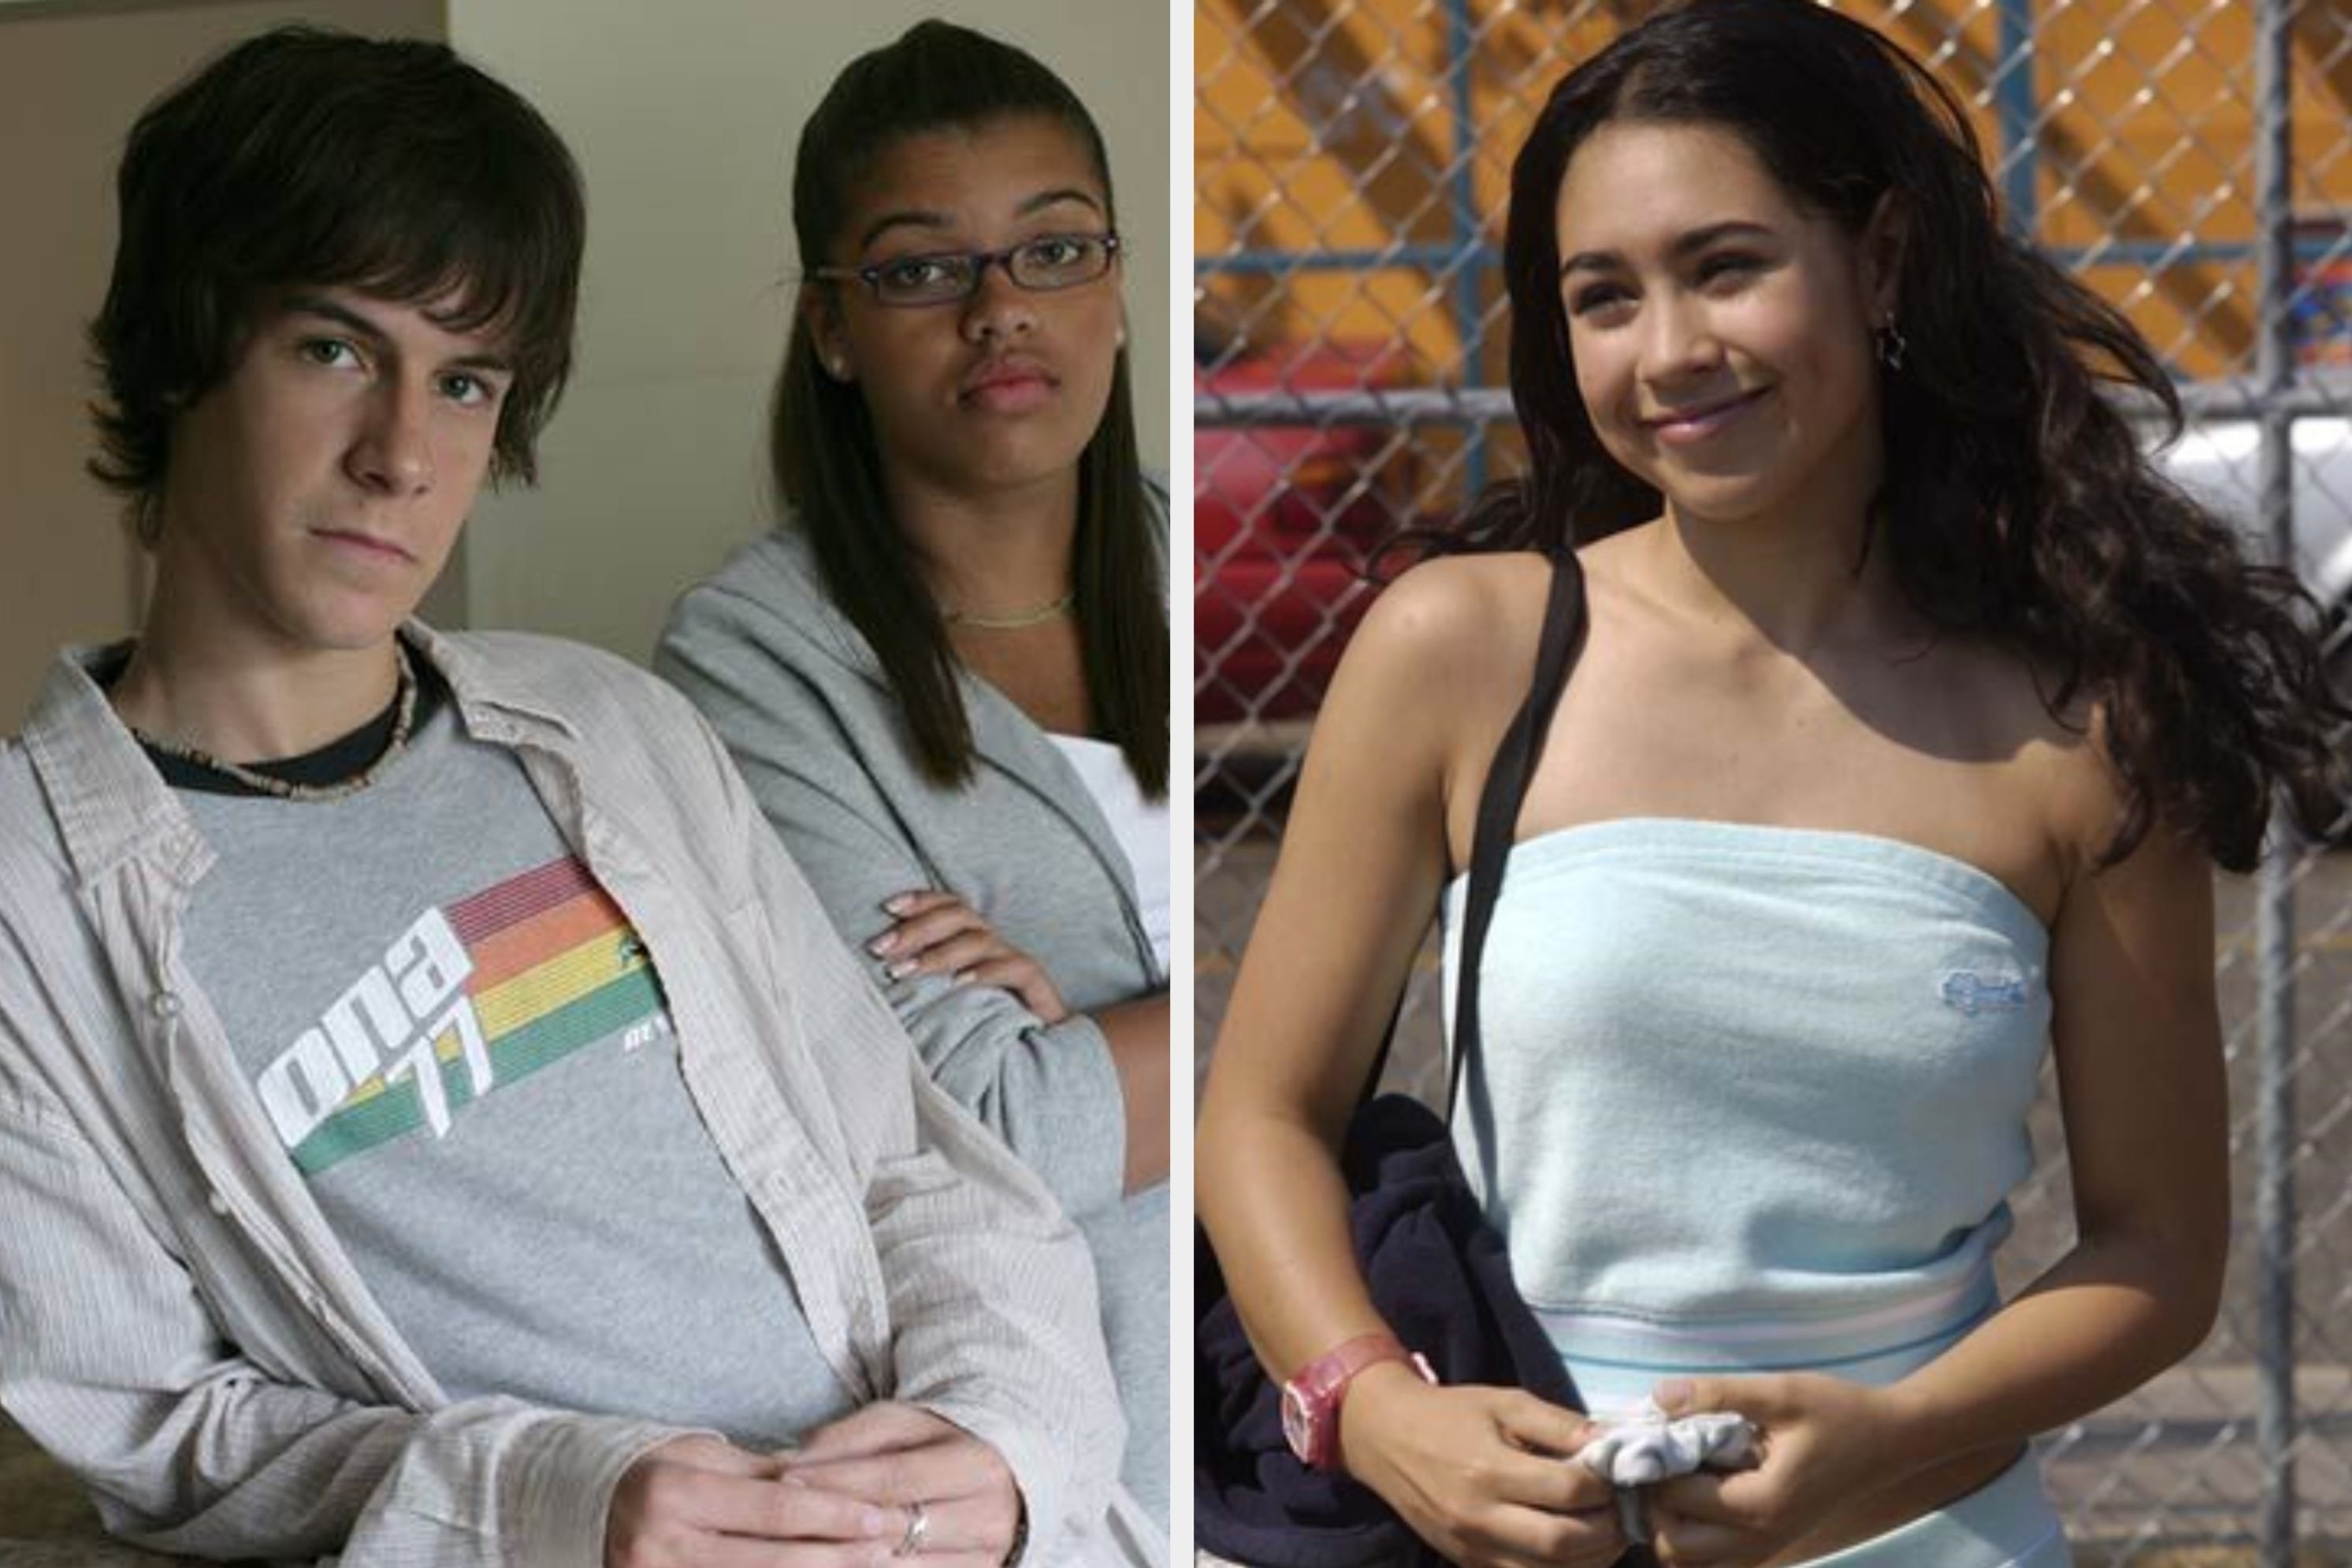 JT, Liberty, and Manny from &quot;Degrassi&quot; 